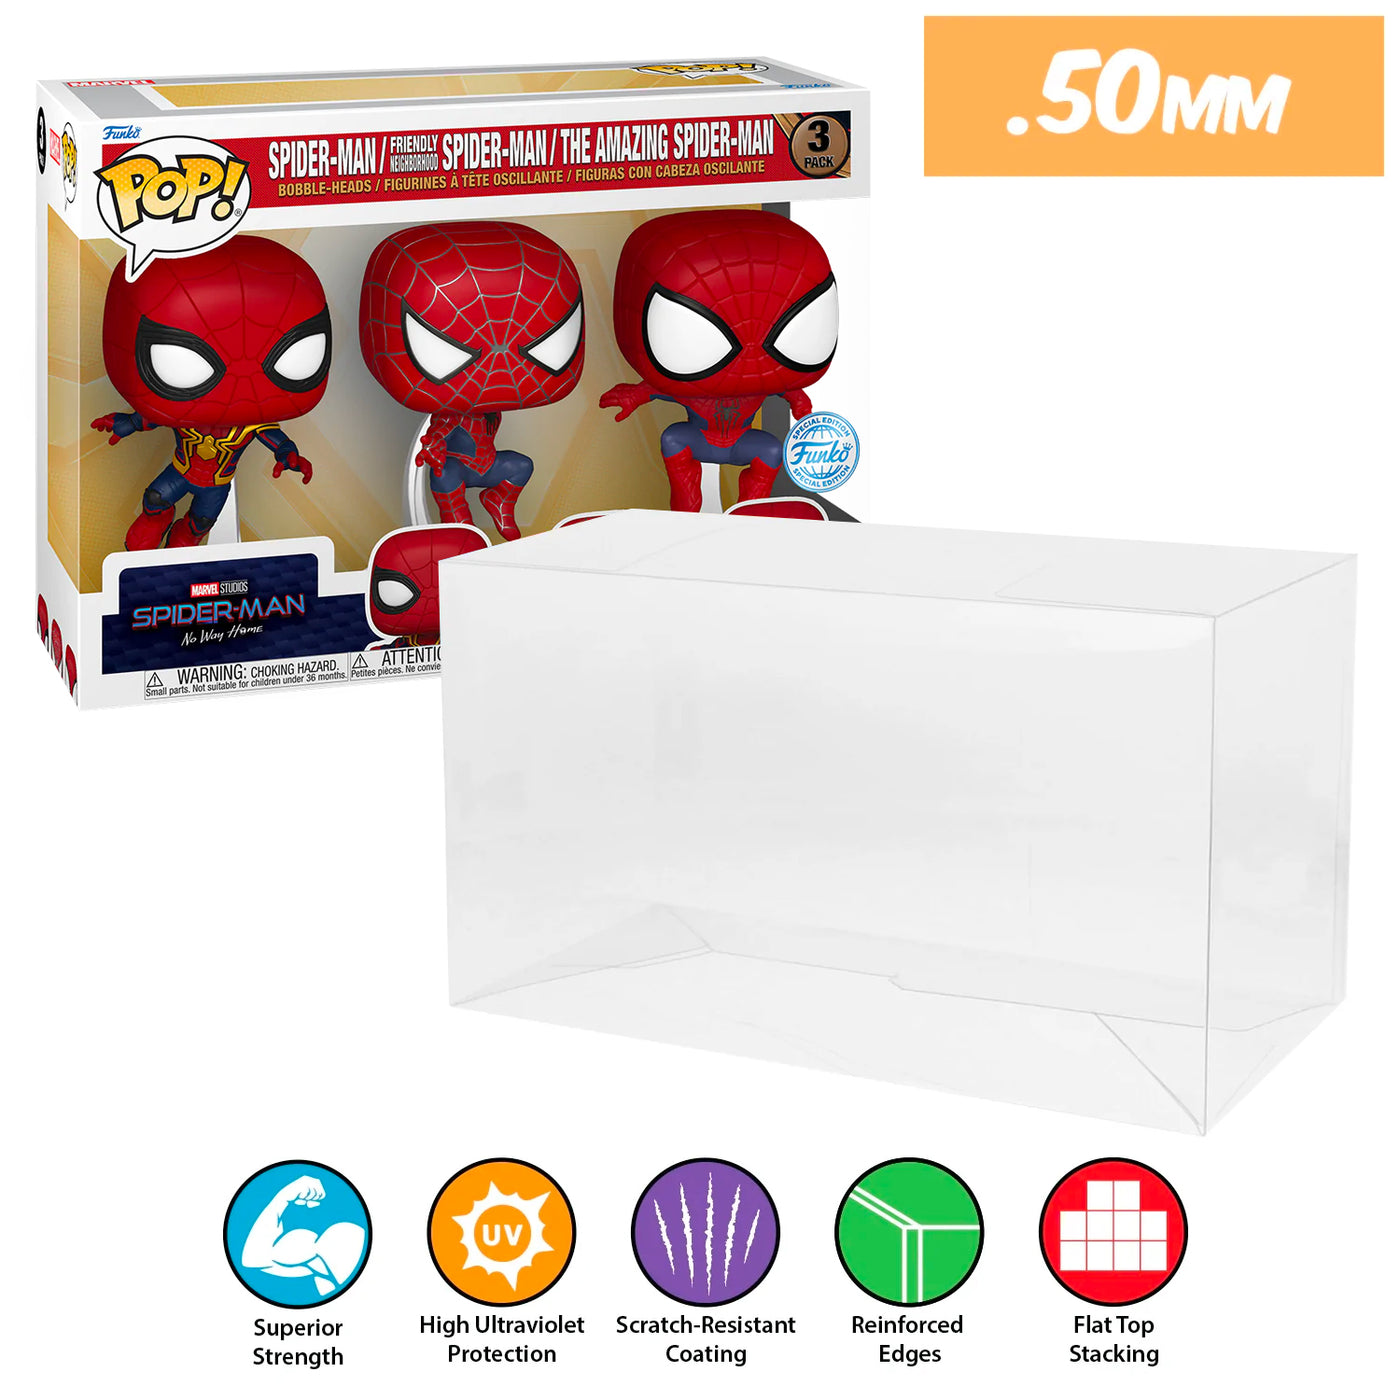 Spider-Man No Way Home 3 pack best funko pop protectors thick strong uv scratch flat top stack vinyl display geek plastic shield vaulted eco armor fits collect protect display case kollector protector